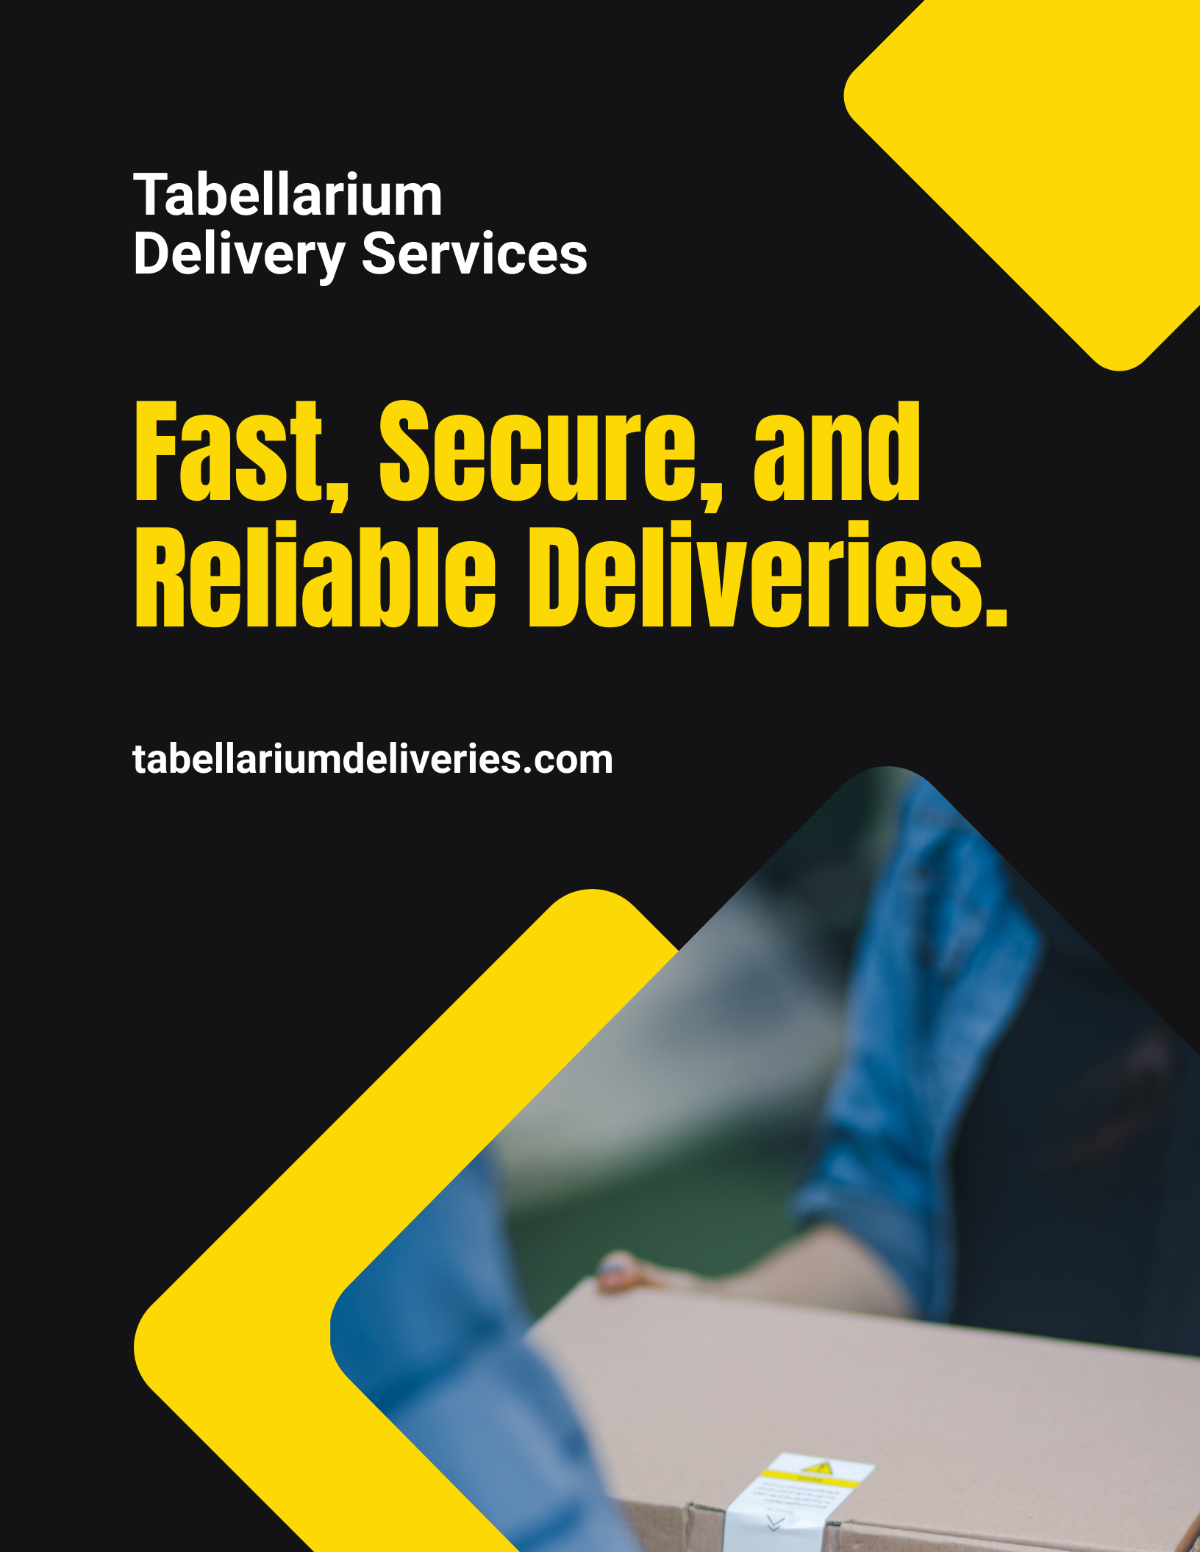 Delivery Service Flyer